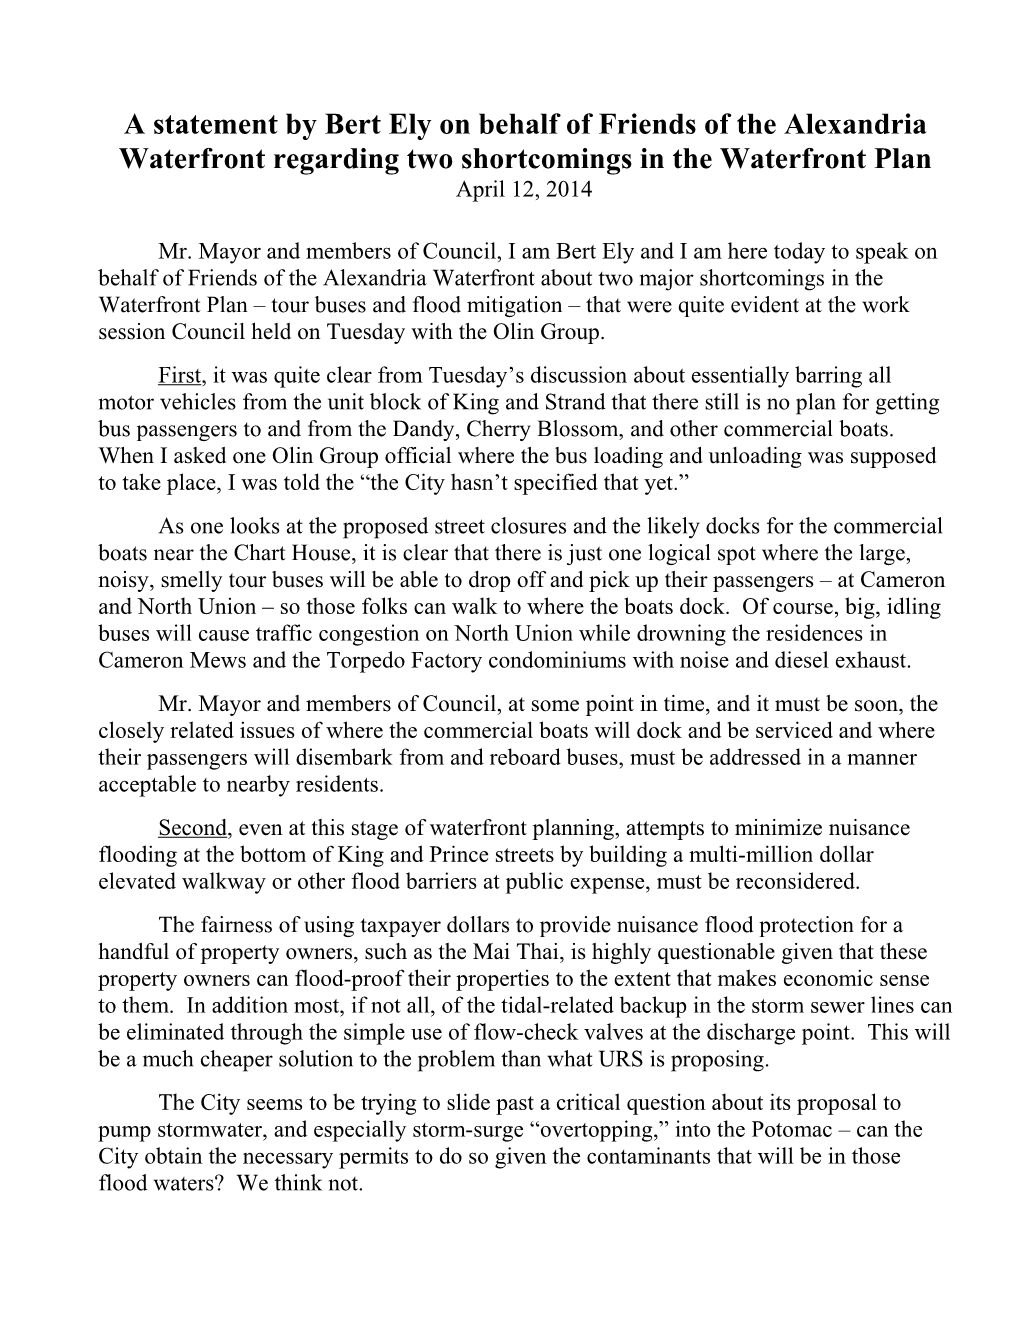 A Statement by Bert Ely to the Alexandria City Council